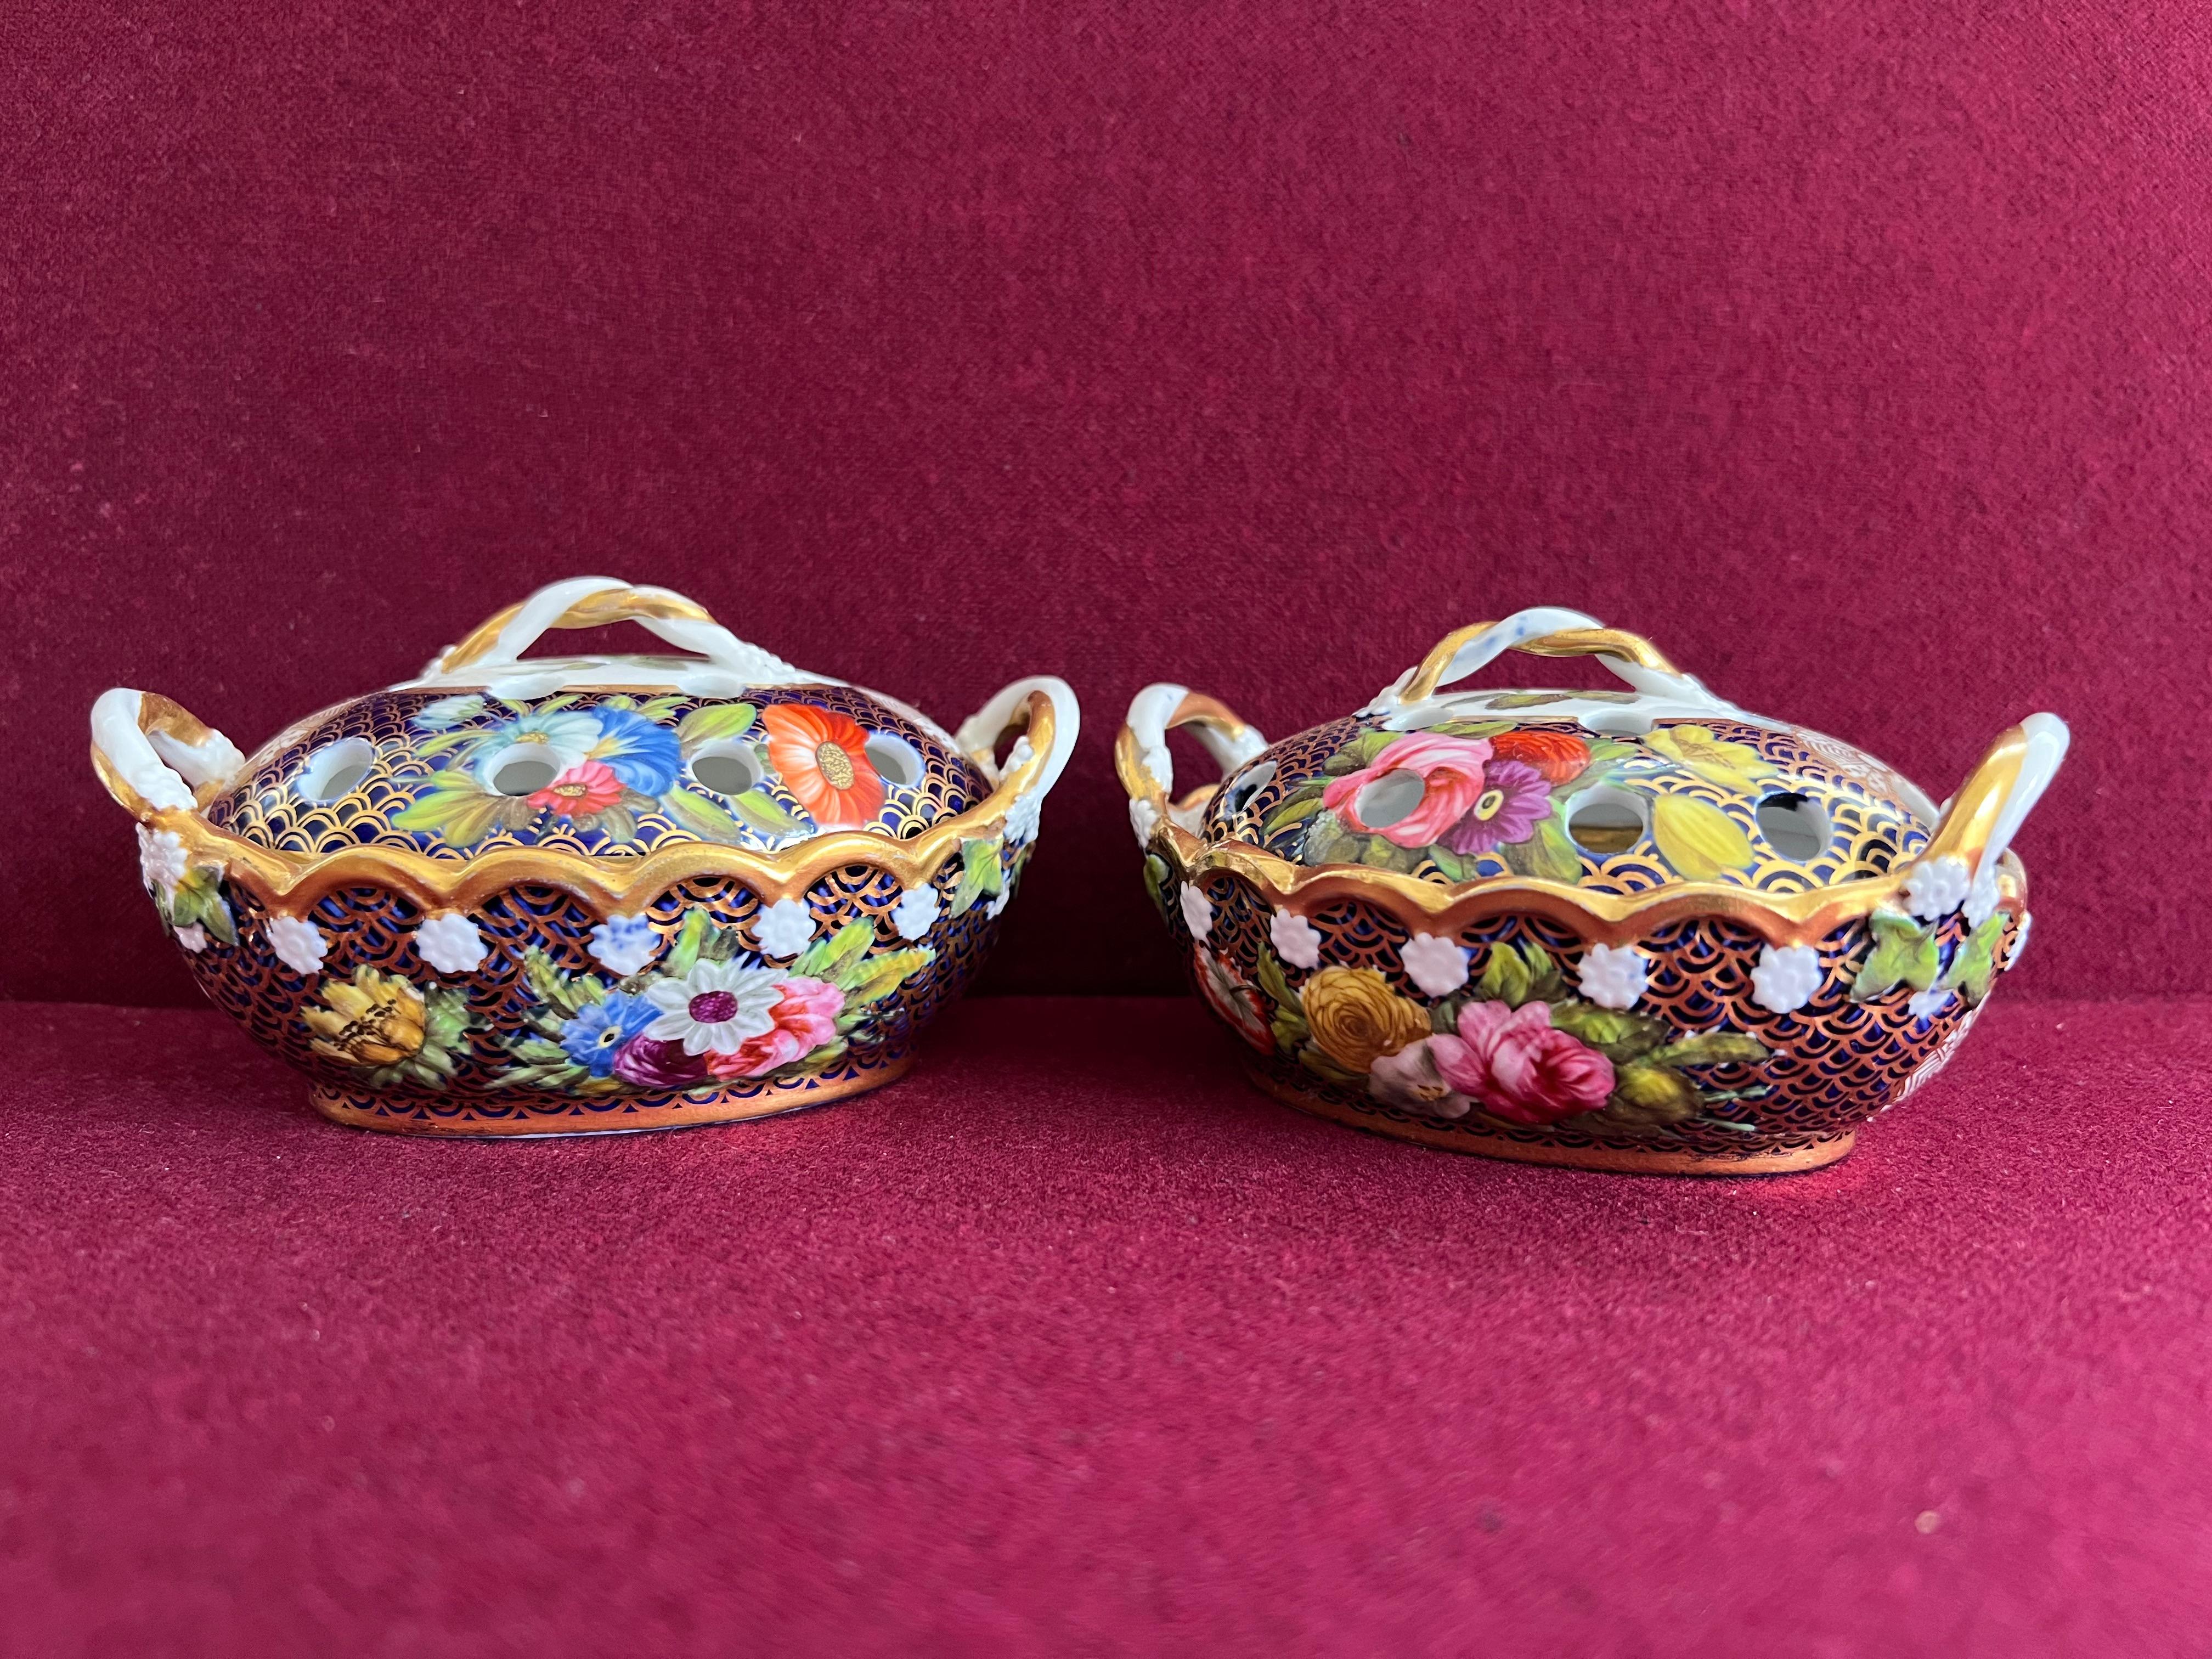 A fine pair of Spode Violet Pot Pourri baskets and covers c.1815-20. Of oval shape with rope-twist handles and finials, the domed covers pierced, painted with pattern 1166. One of the most sumptuous designs produced has pattern number 1166.  Pattern